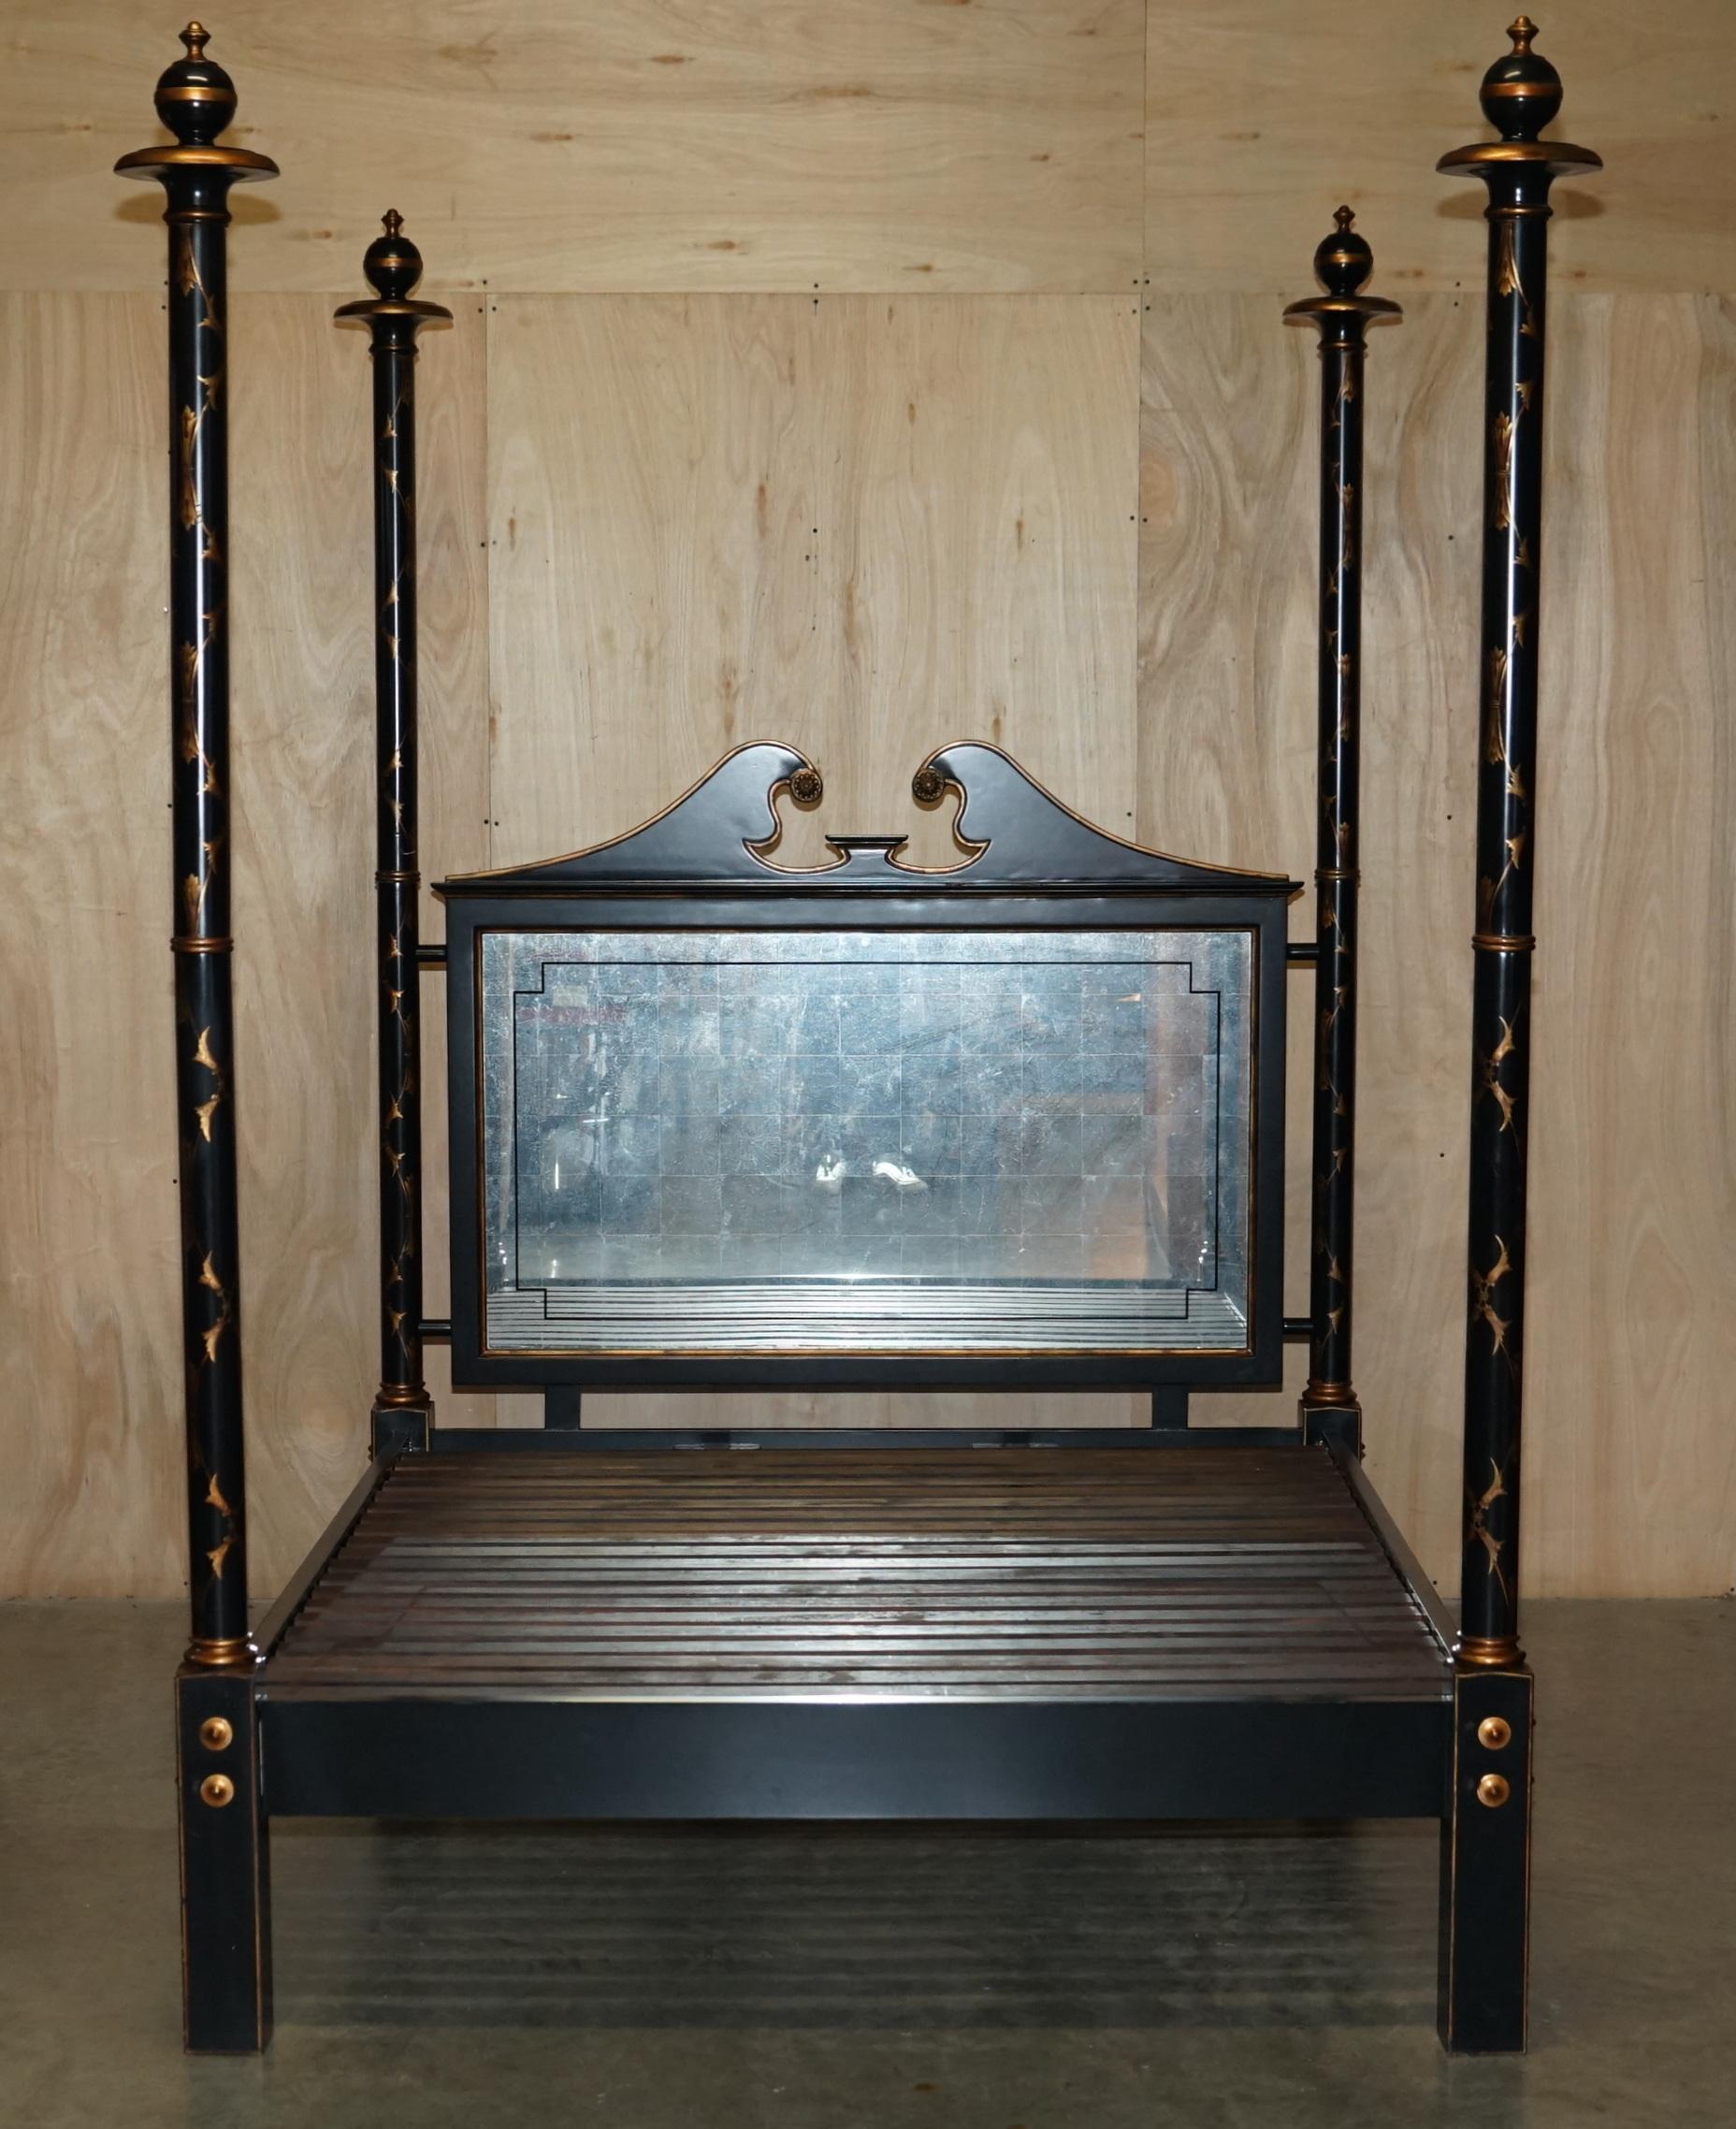 Royal House Antiques

Royal House Antiques is delighted to offer for sale this sublime vintage very large Chinese Chinoiserie Lacquered four posted bed frame with antiqued glass headboard

Please note the delivery fee listed is just a guide, it